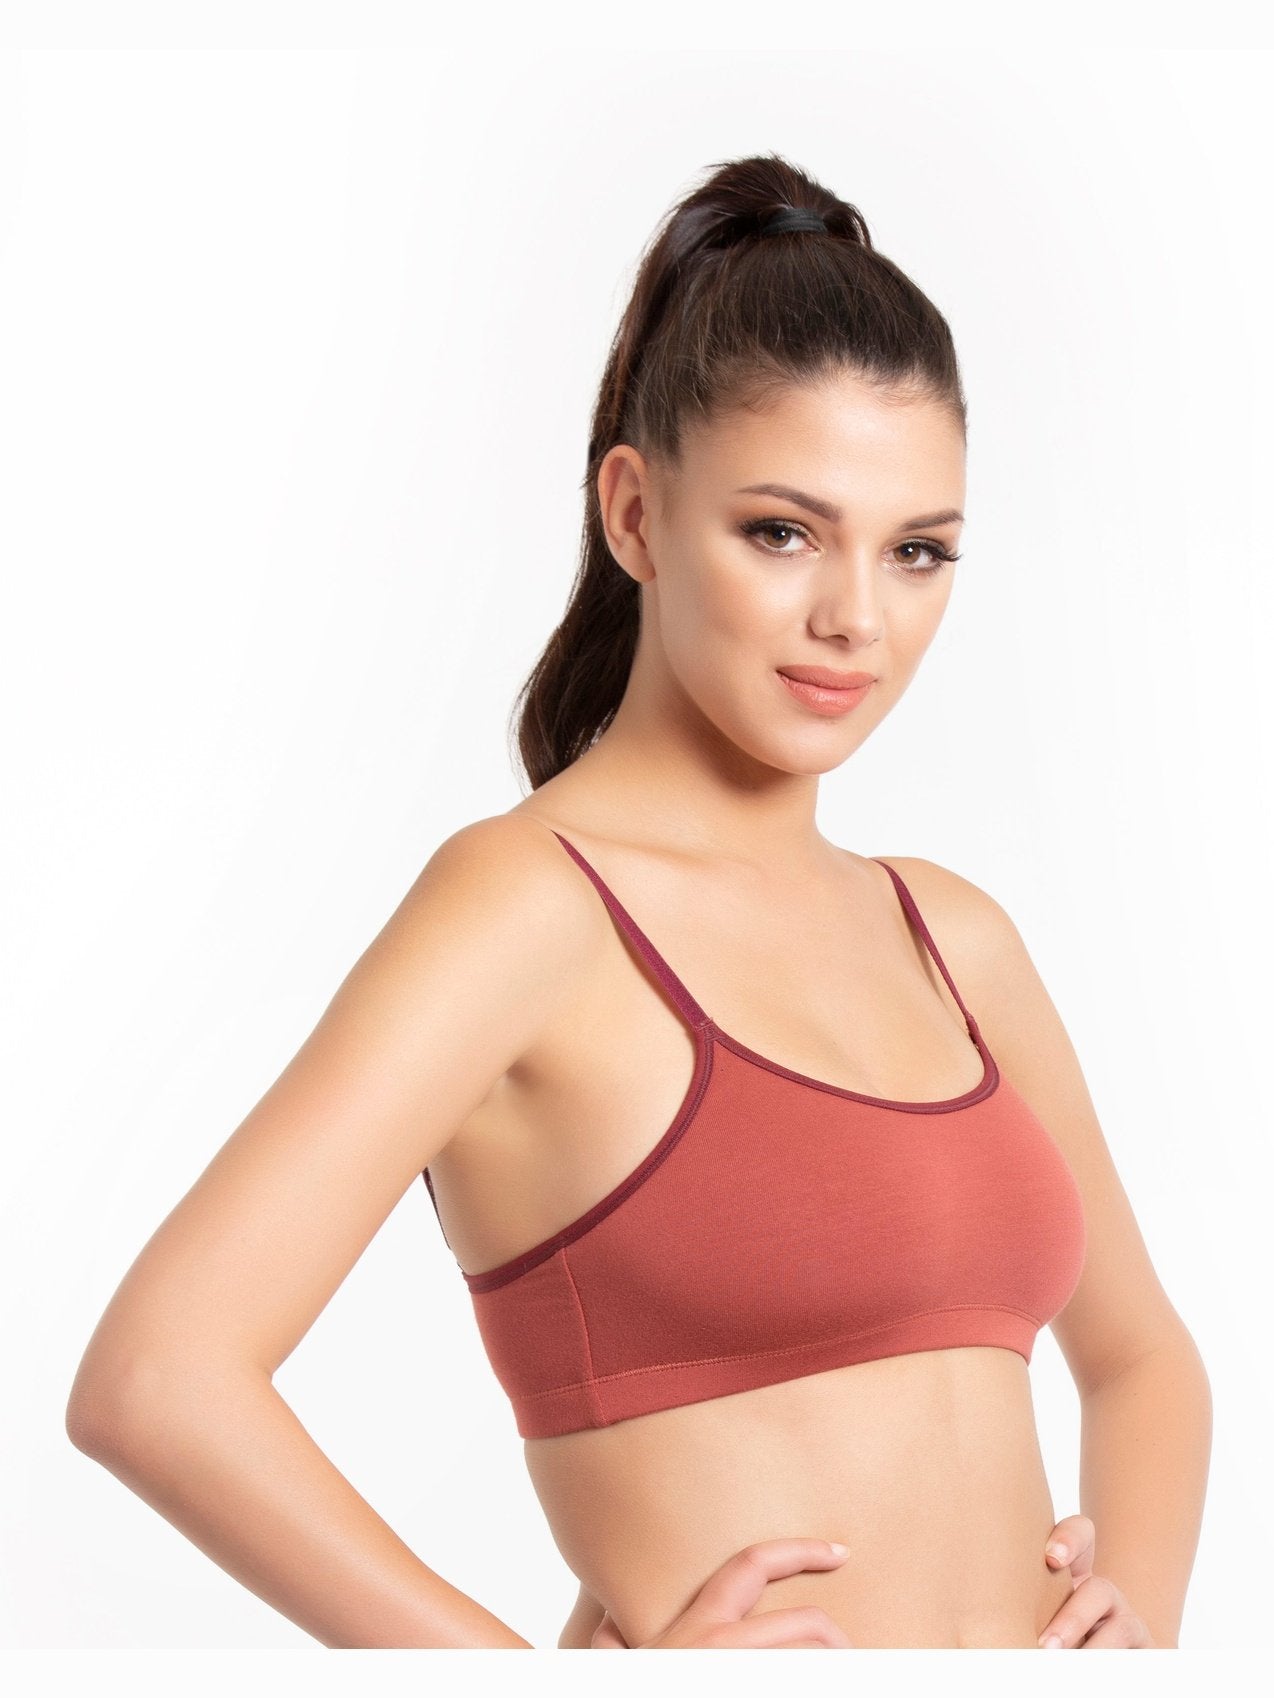 Envie Beginners bra, Teenage bra, Non Wired, Super Soft fabric for soft touch comfort